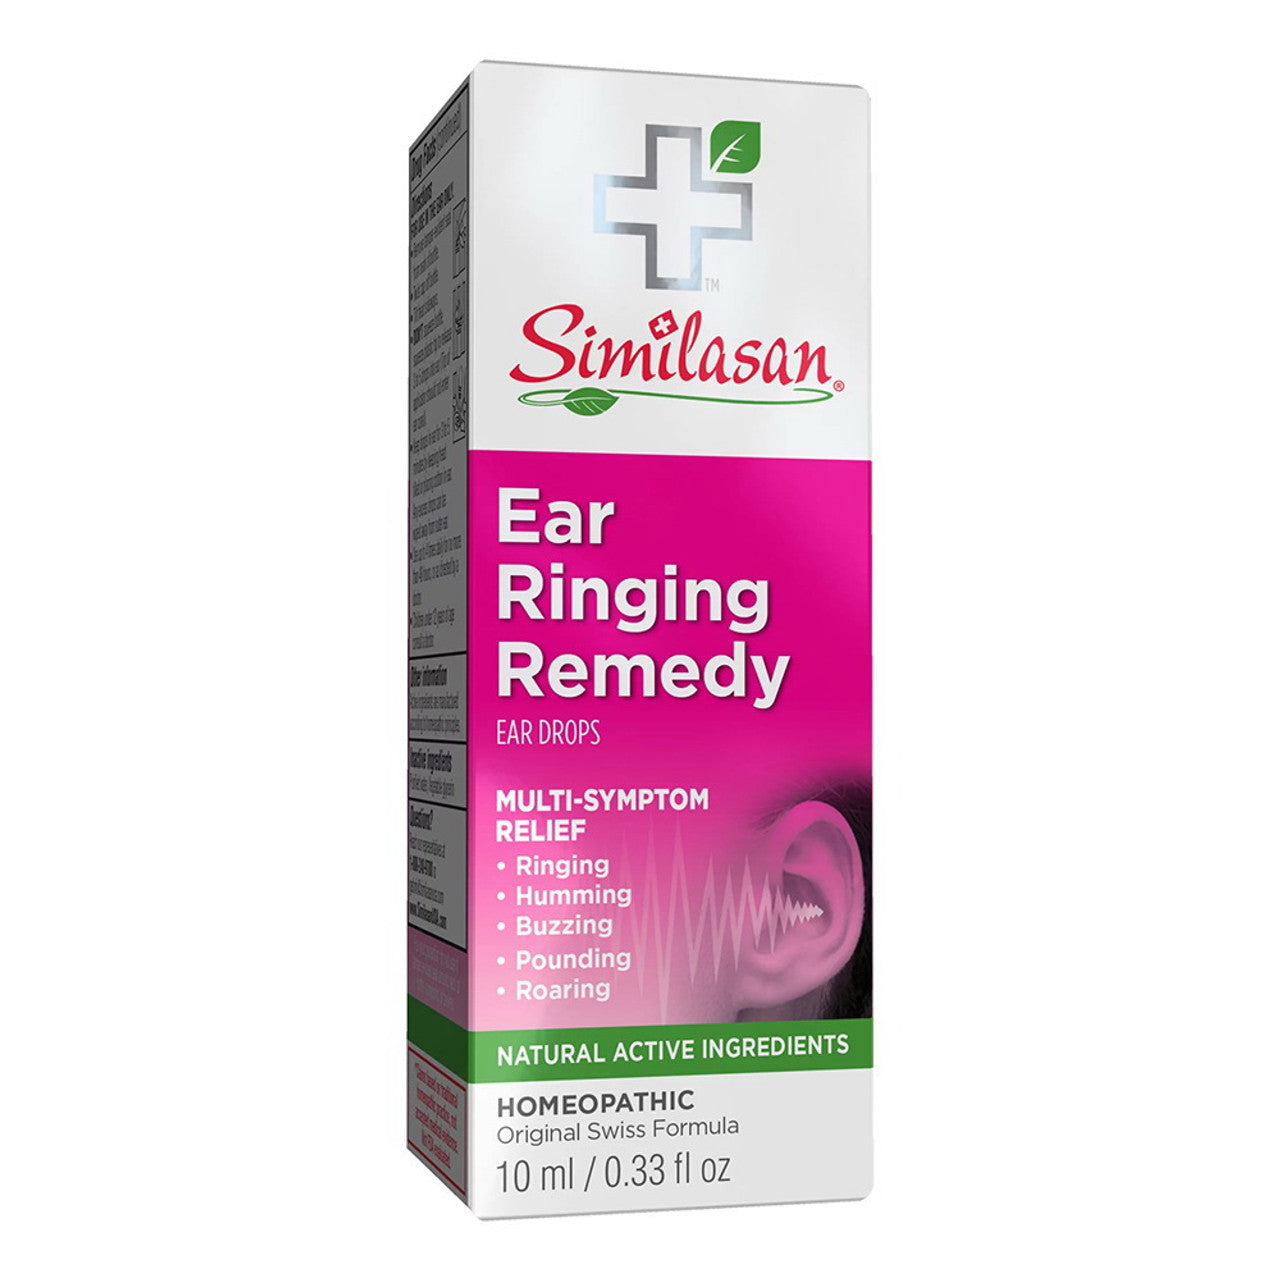 Similasan Ear Ringing Remedy Drops for Temporary Ear Ringing Relief, 0.33 Oz